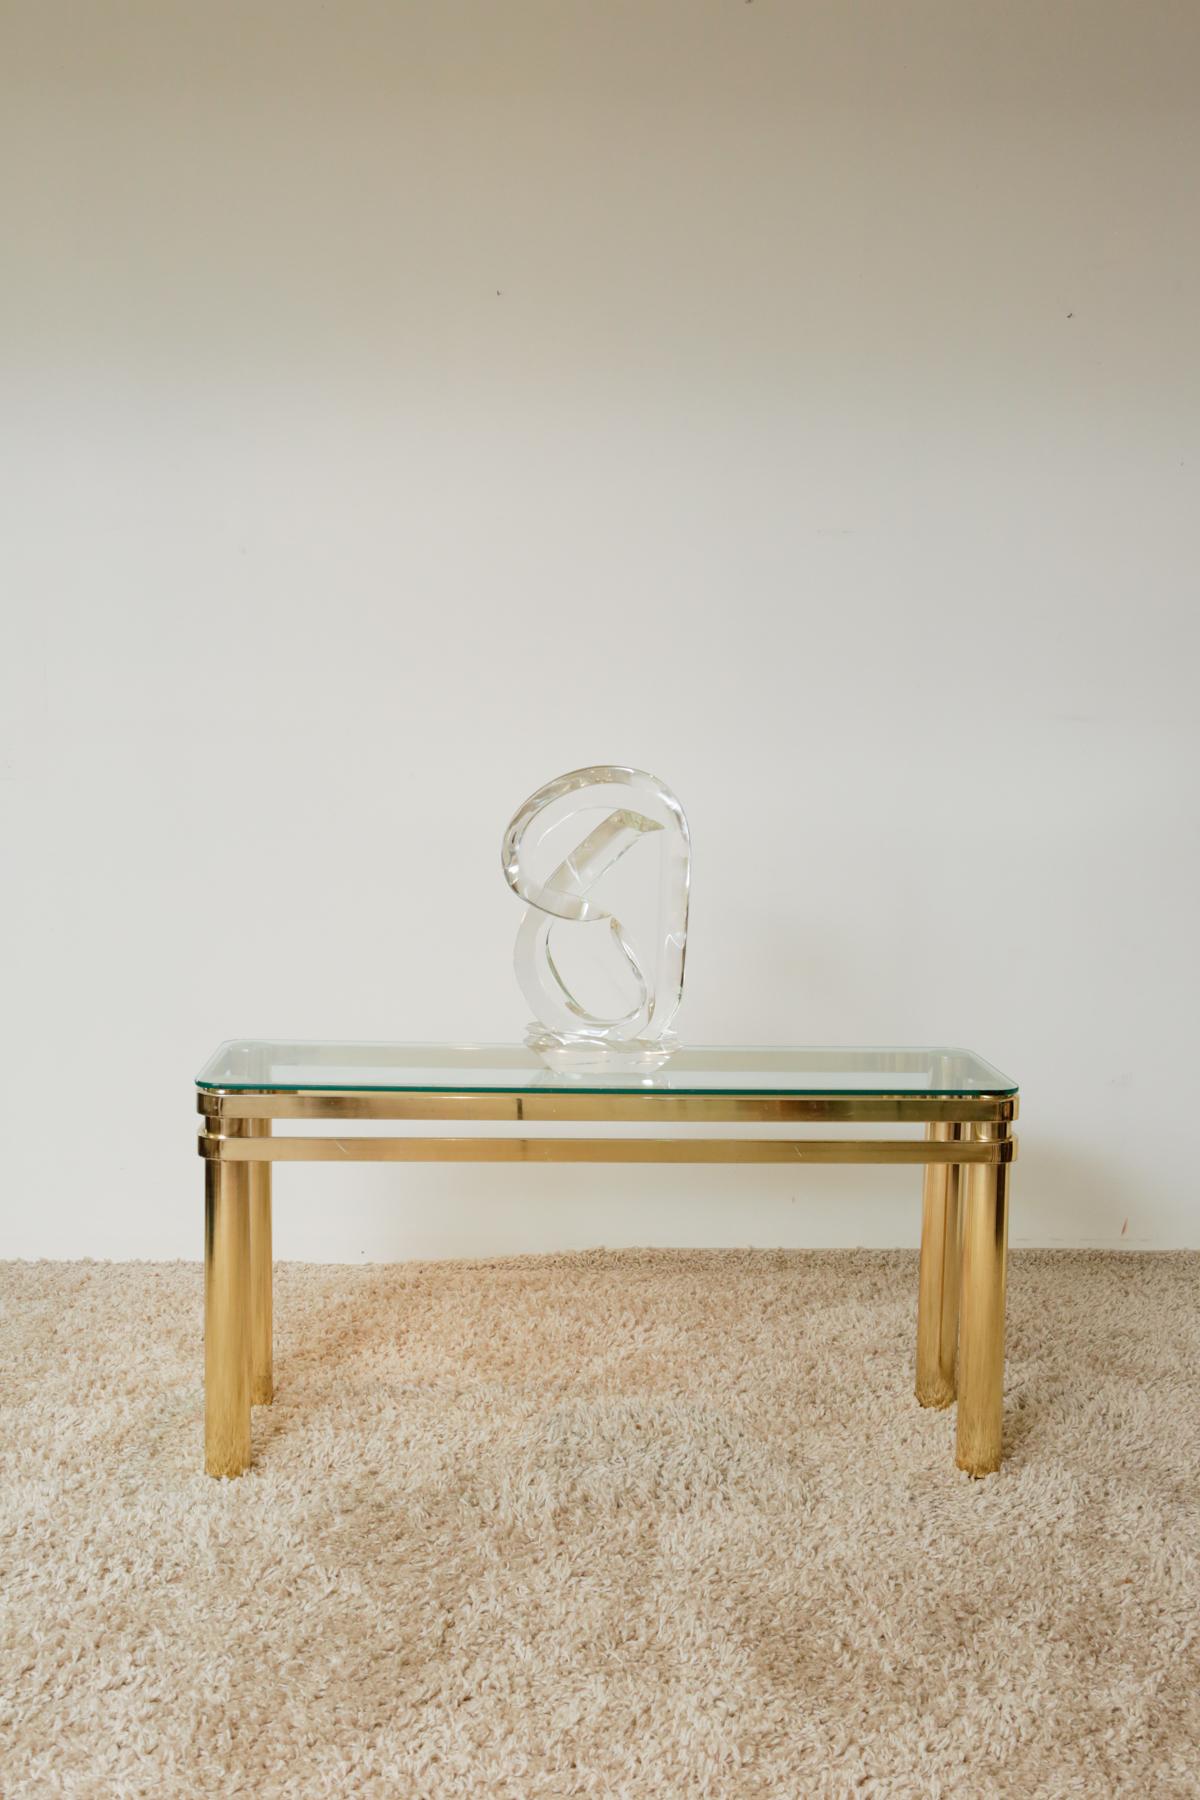 Karl Springer Hollywood Regency style brass and glass console table

Vintage Karl Springer-style brass console table with a glass top, Circa 1970s. Stunning design with curved edges on the glass top. Its simple lines consist of four brass tube